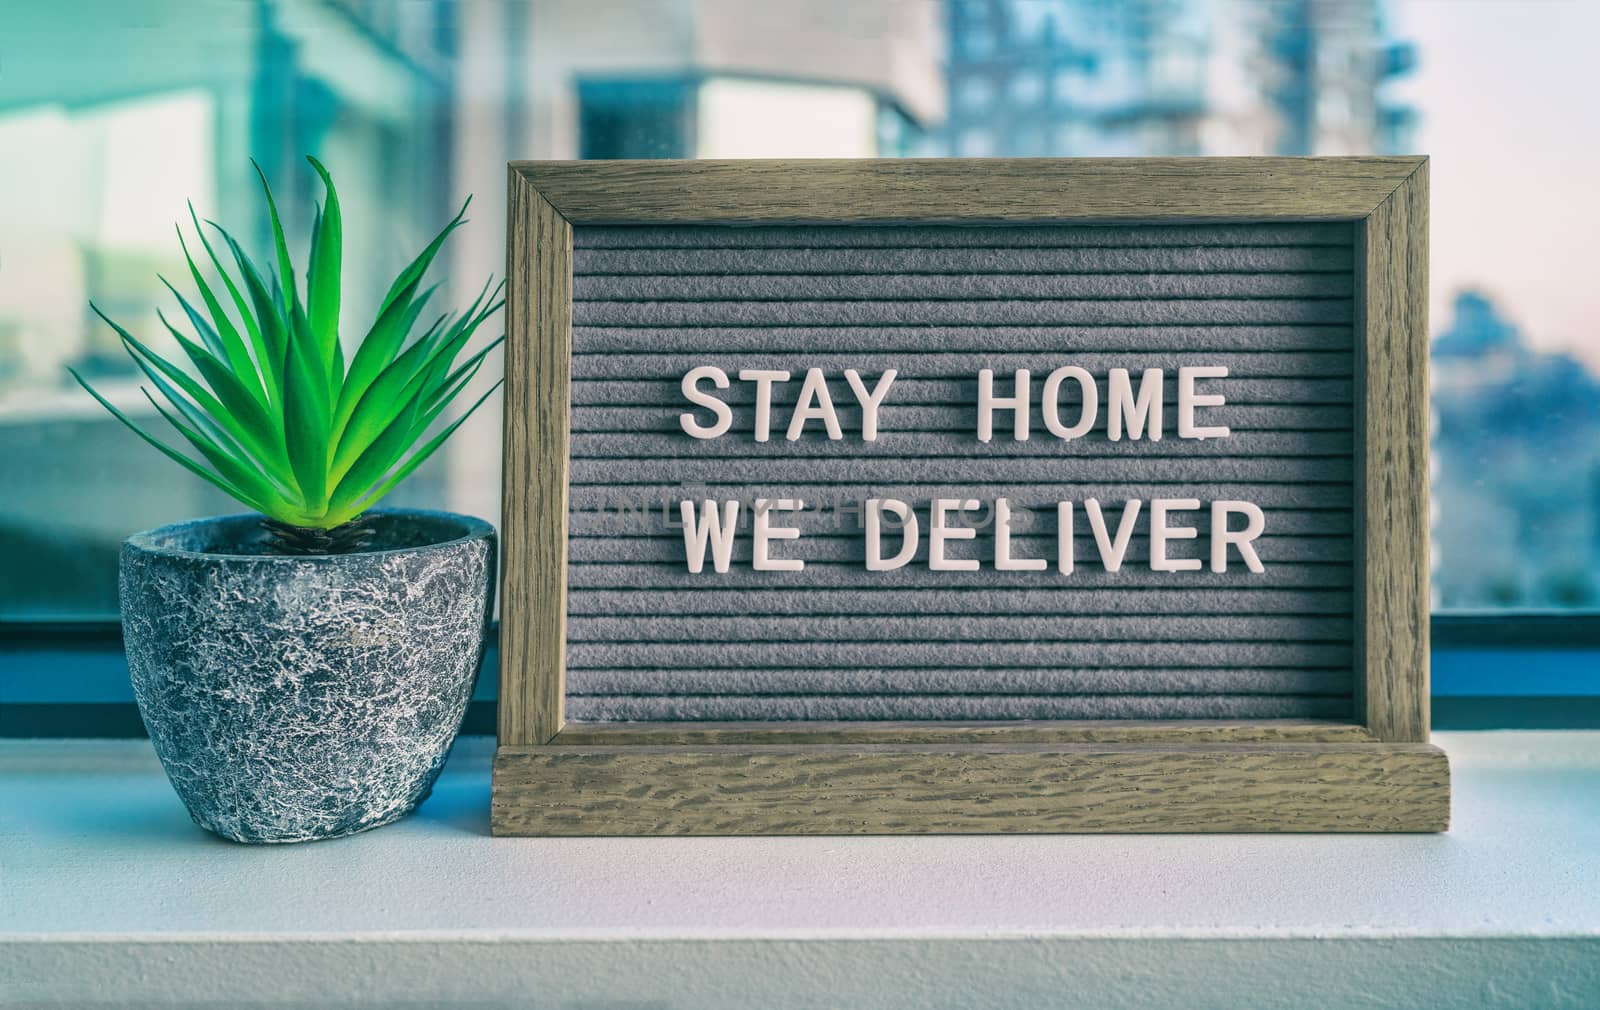 STAY HOME WE DELIVER Coronavirus social distancing restaurant business message sign. COVID-19 online delivery to home, staying inside. Grey felt board with plant.